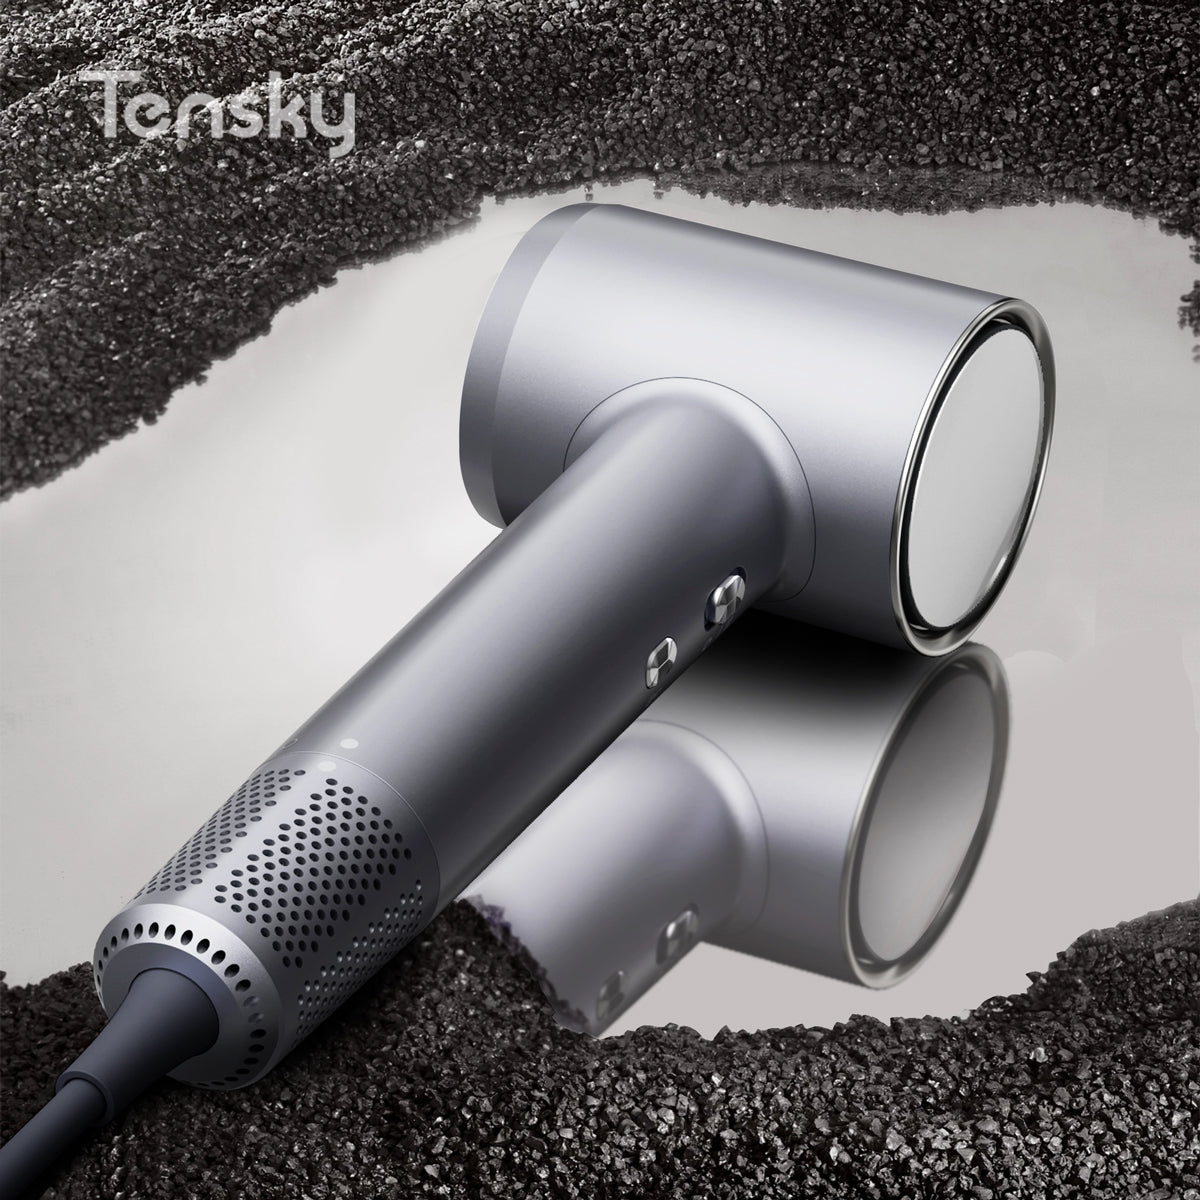 Revolutionize your hair routine: The hair dryer that cares